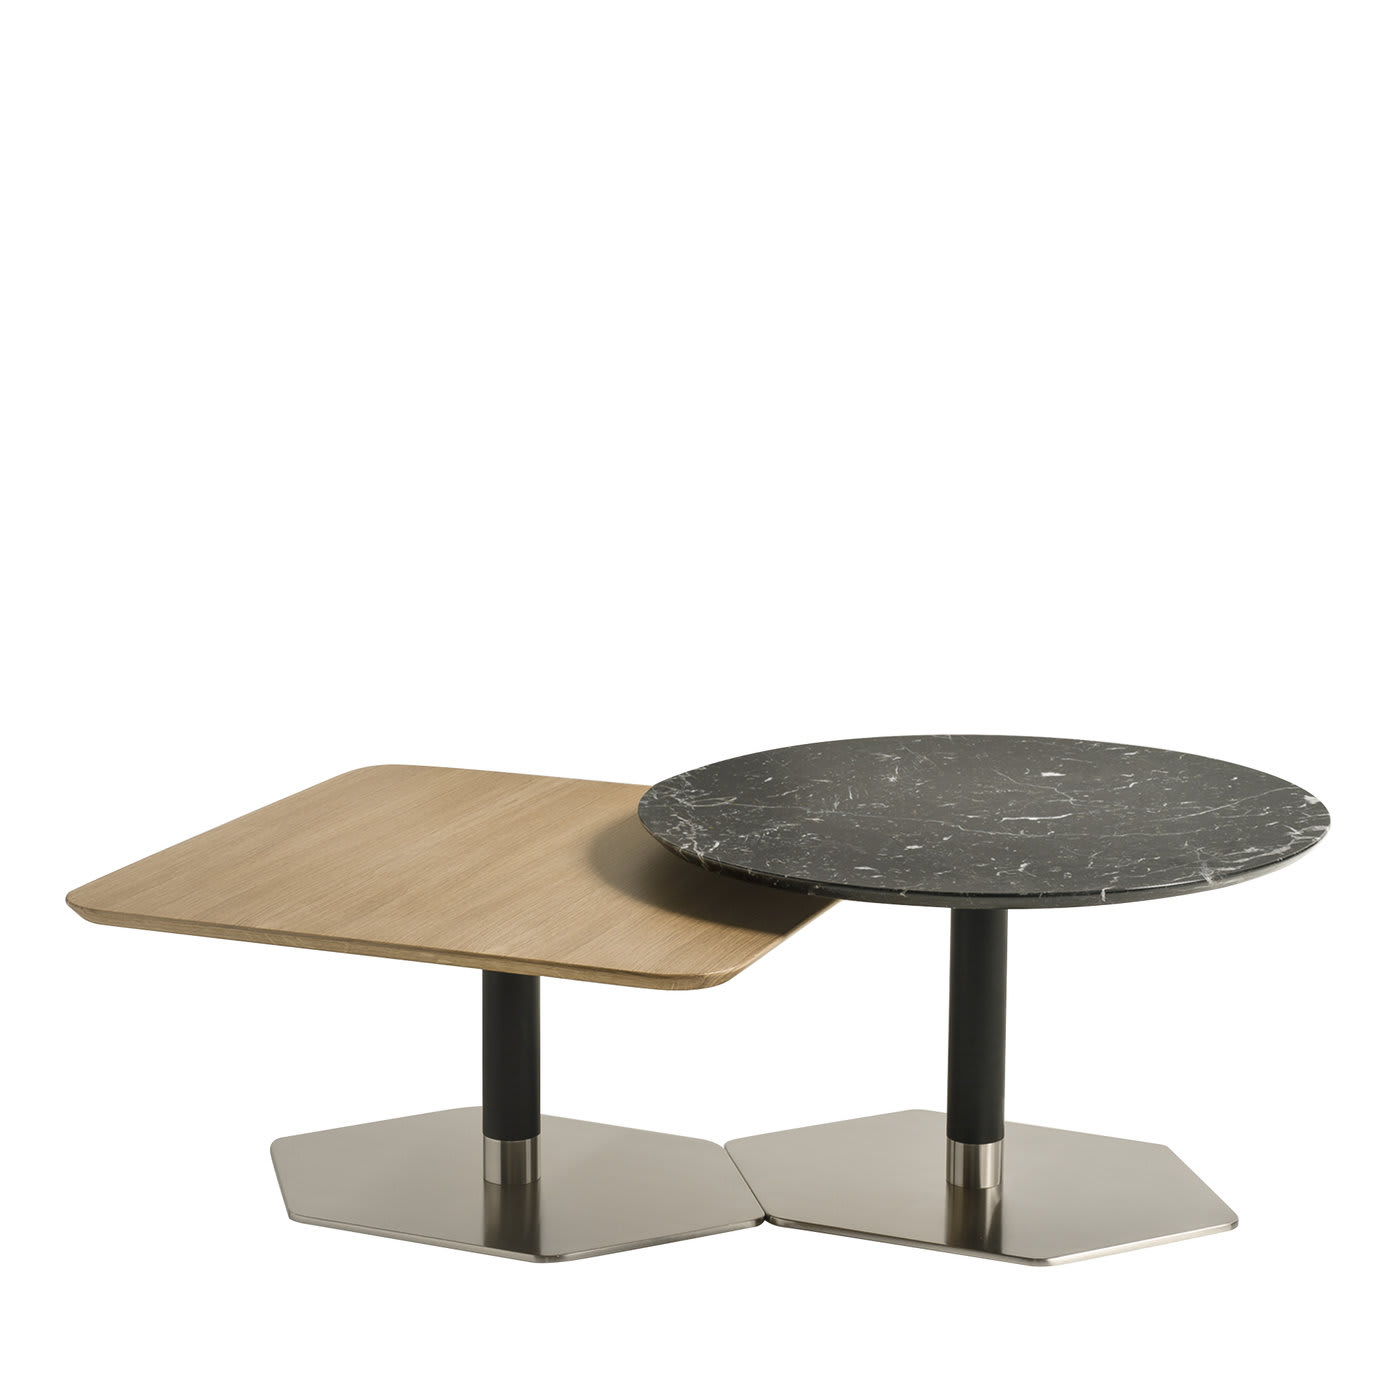 Pattern Set of Two Nesting Tables - Extroverso